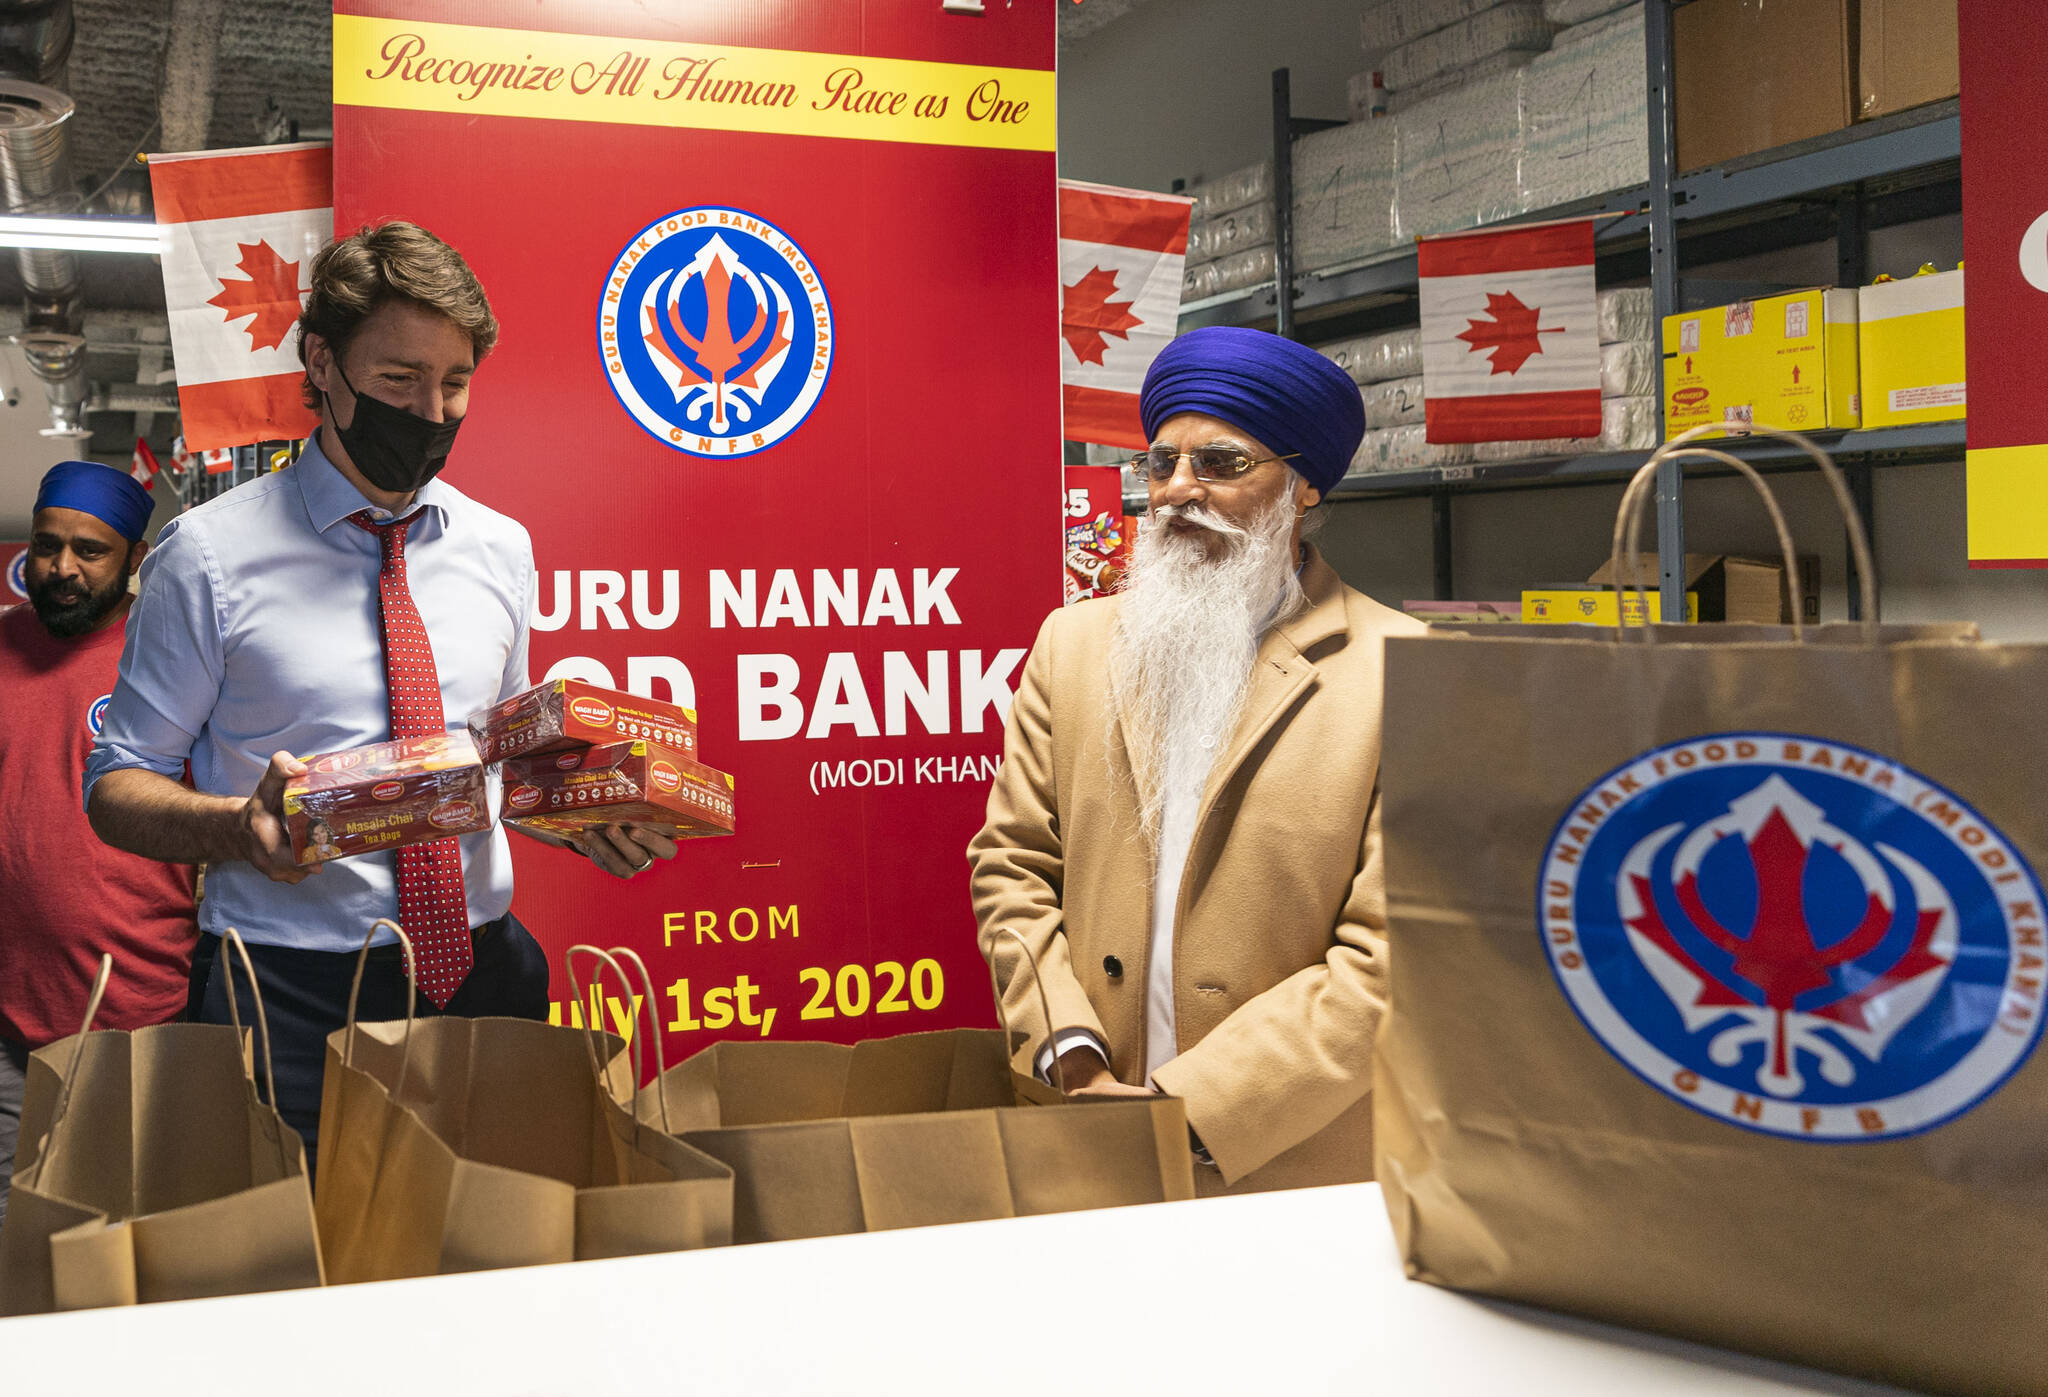 Prime Minister Justin Trudeau gathers some tea for a food hamper during a visit to the Guru Nanak Food Bank in Surrey, B.C. on Tuesday May 24, 2022. THE CANADIAN PRESS/Rich Lam